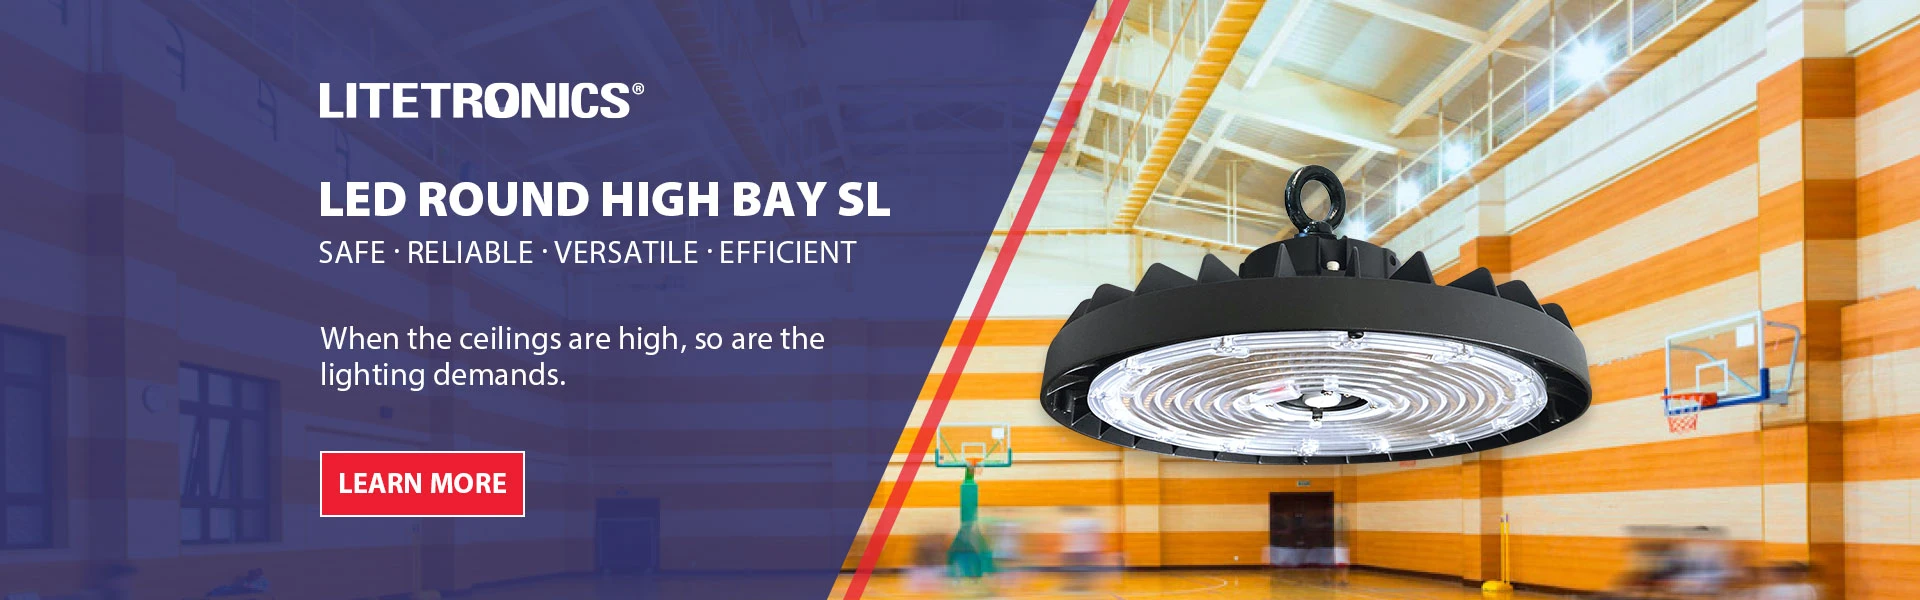 Litetronics LED Round High Bay - When the ceilings are high, so are the lighting demands.